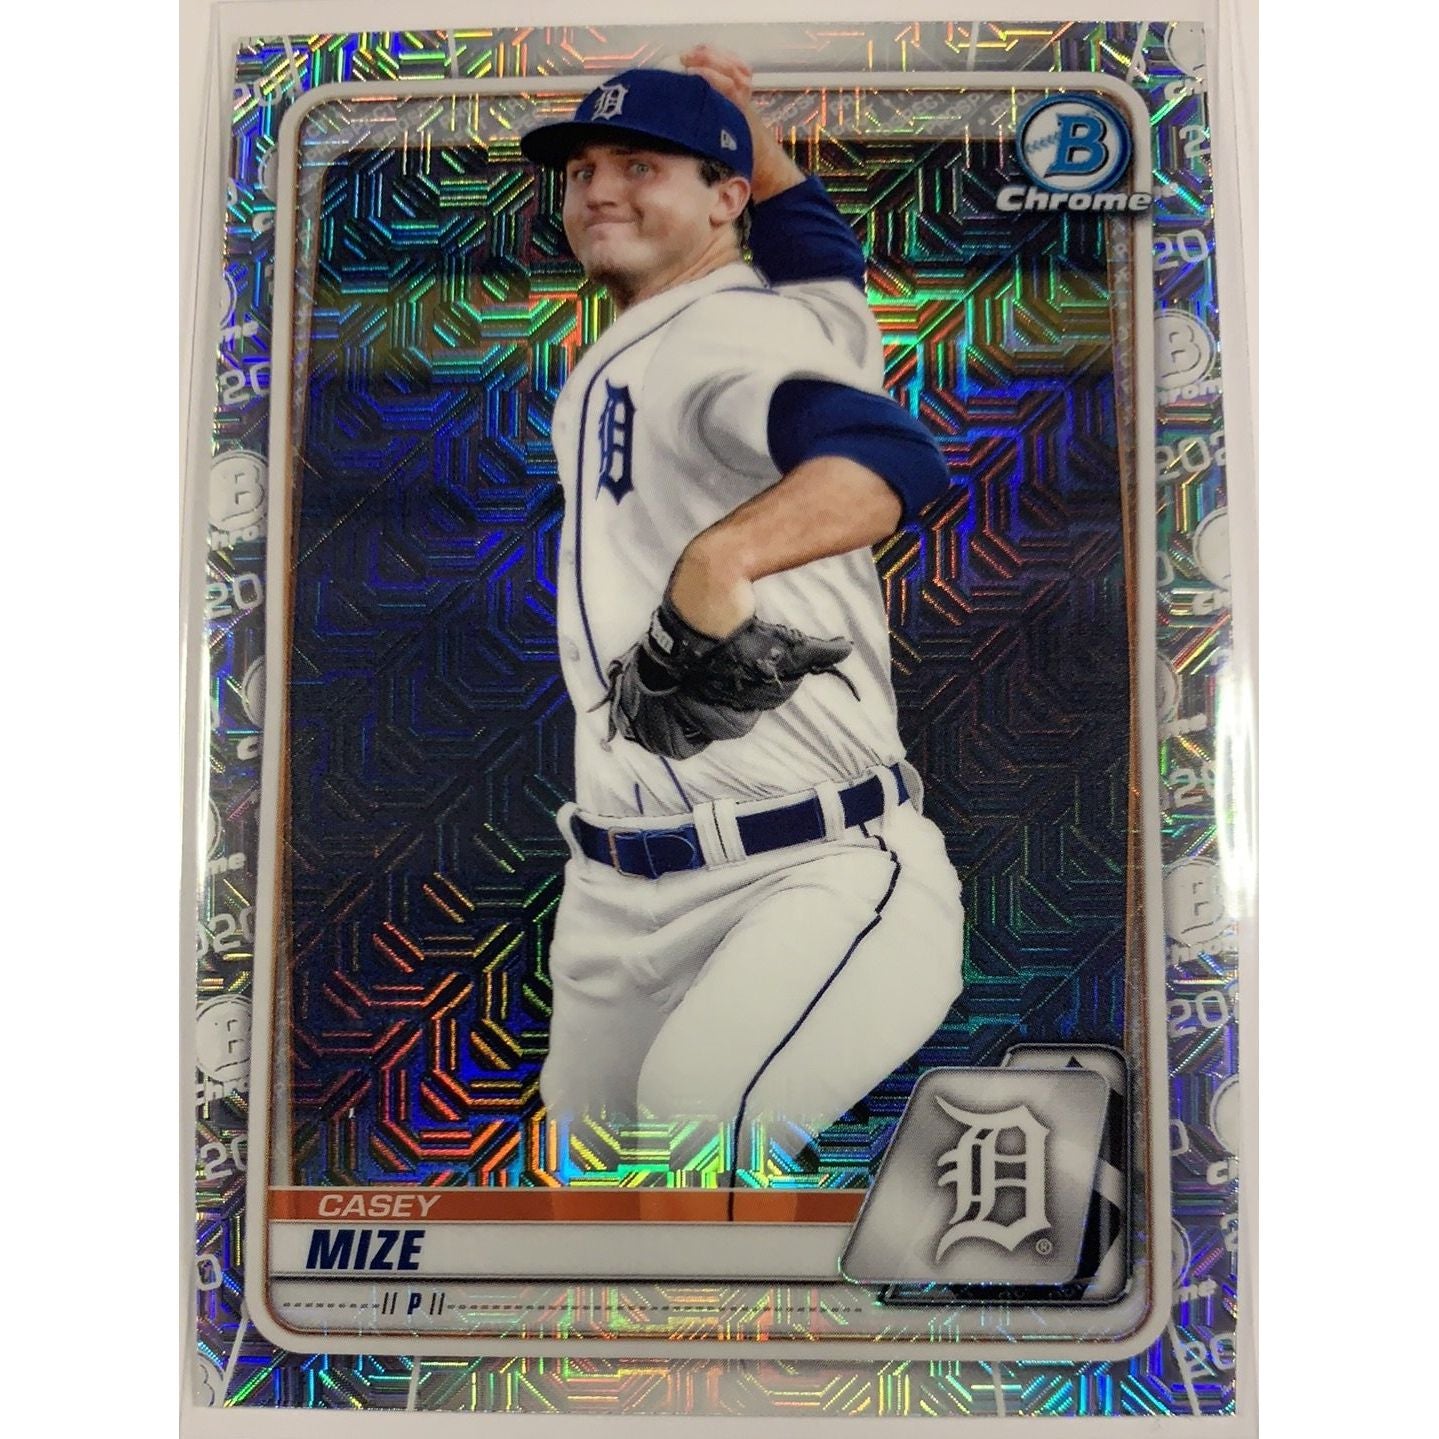  2020 Bowman Chrome Casey Mize Mojo Refractor  Local Legends Cards & Collectibles